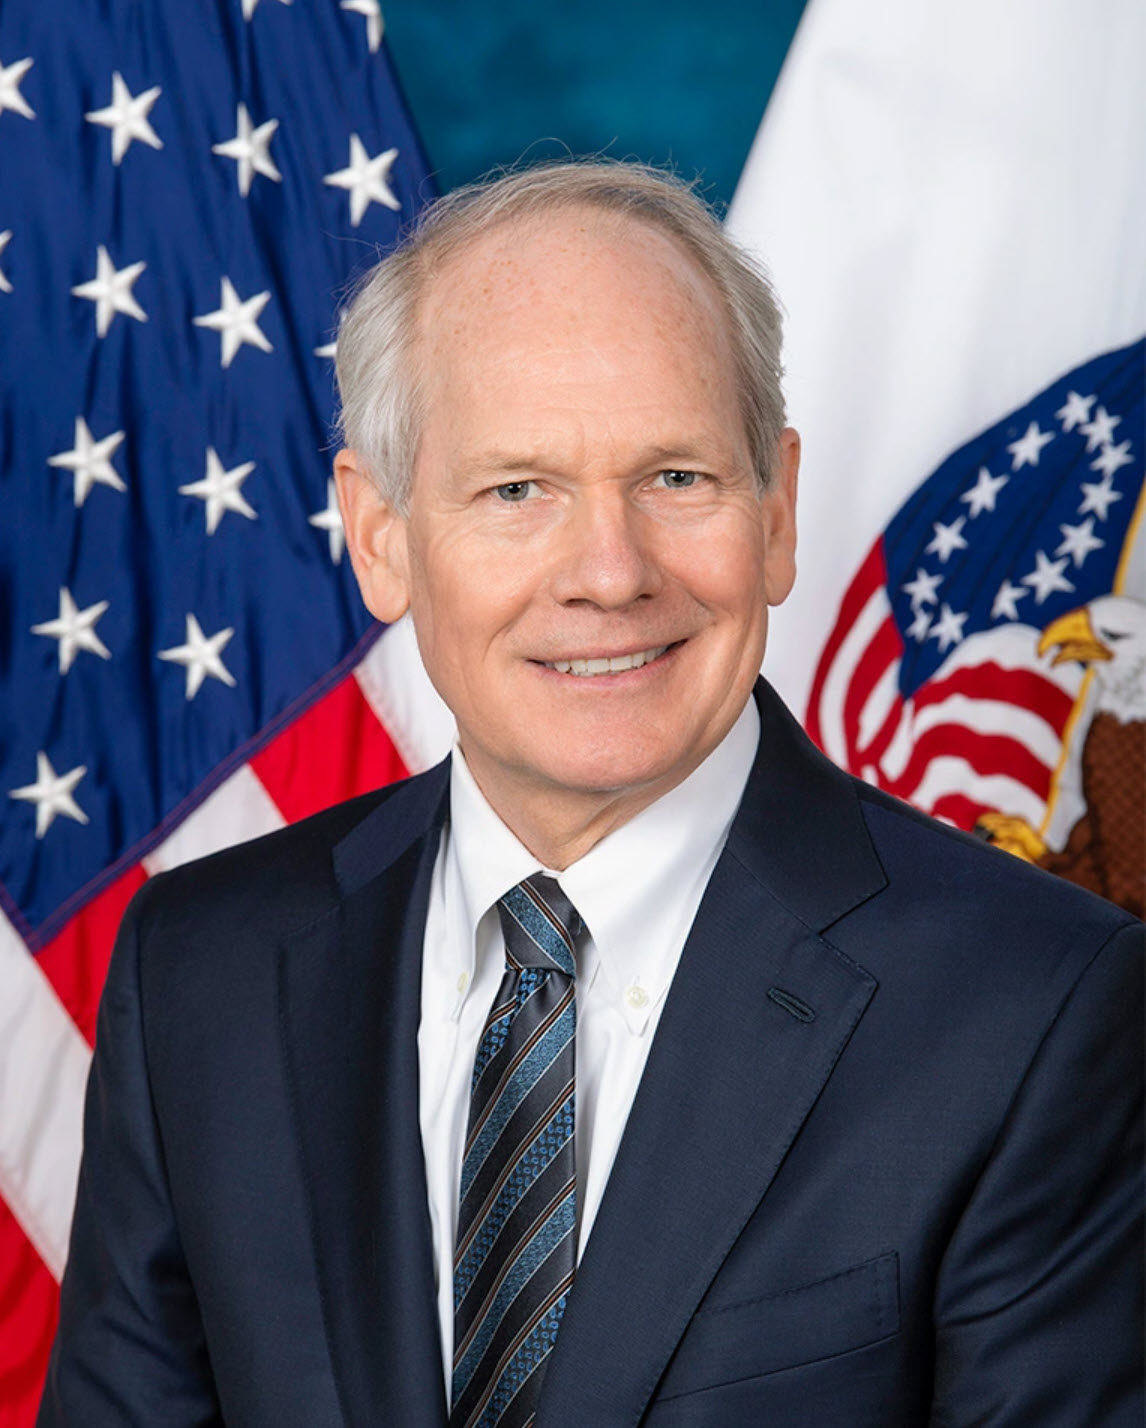 Kurt DelBene with the US and VA flag in the background